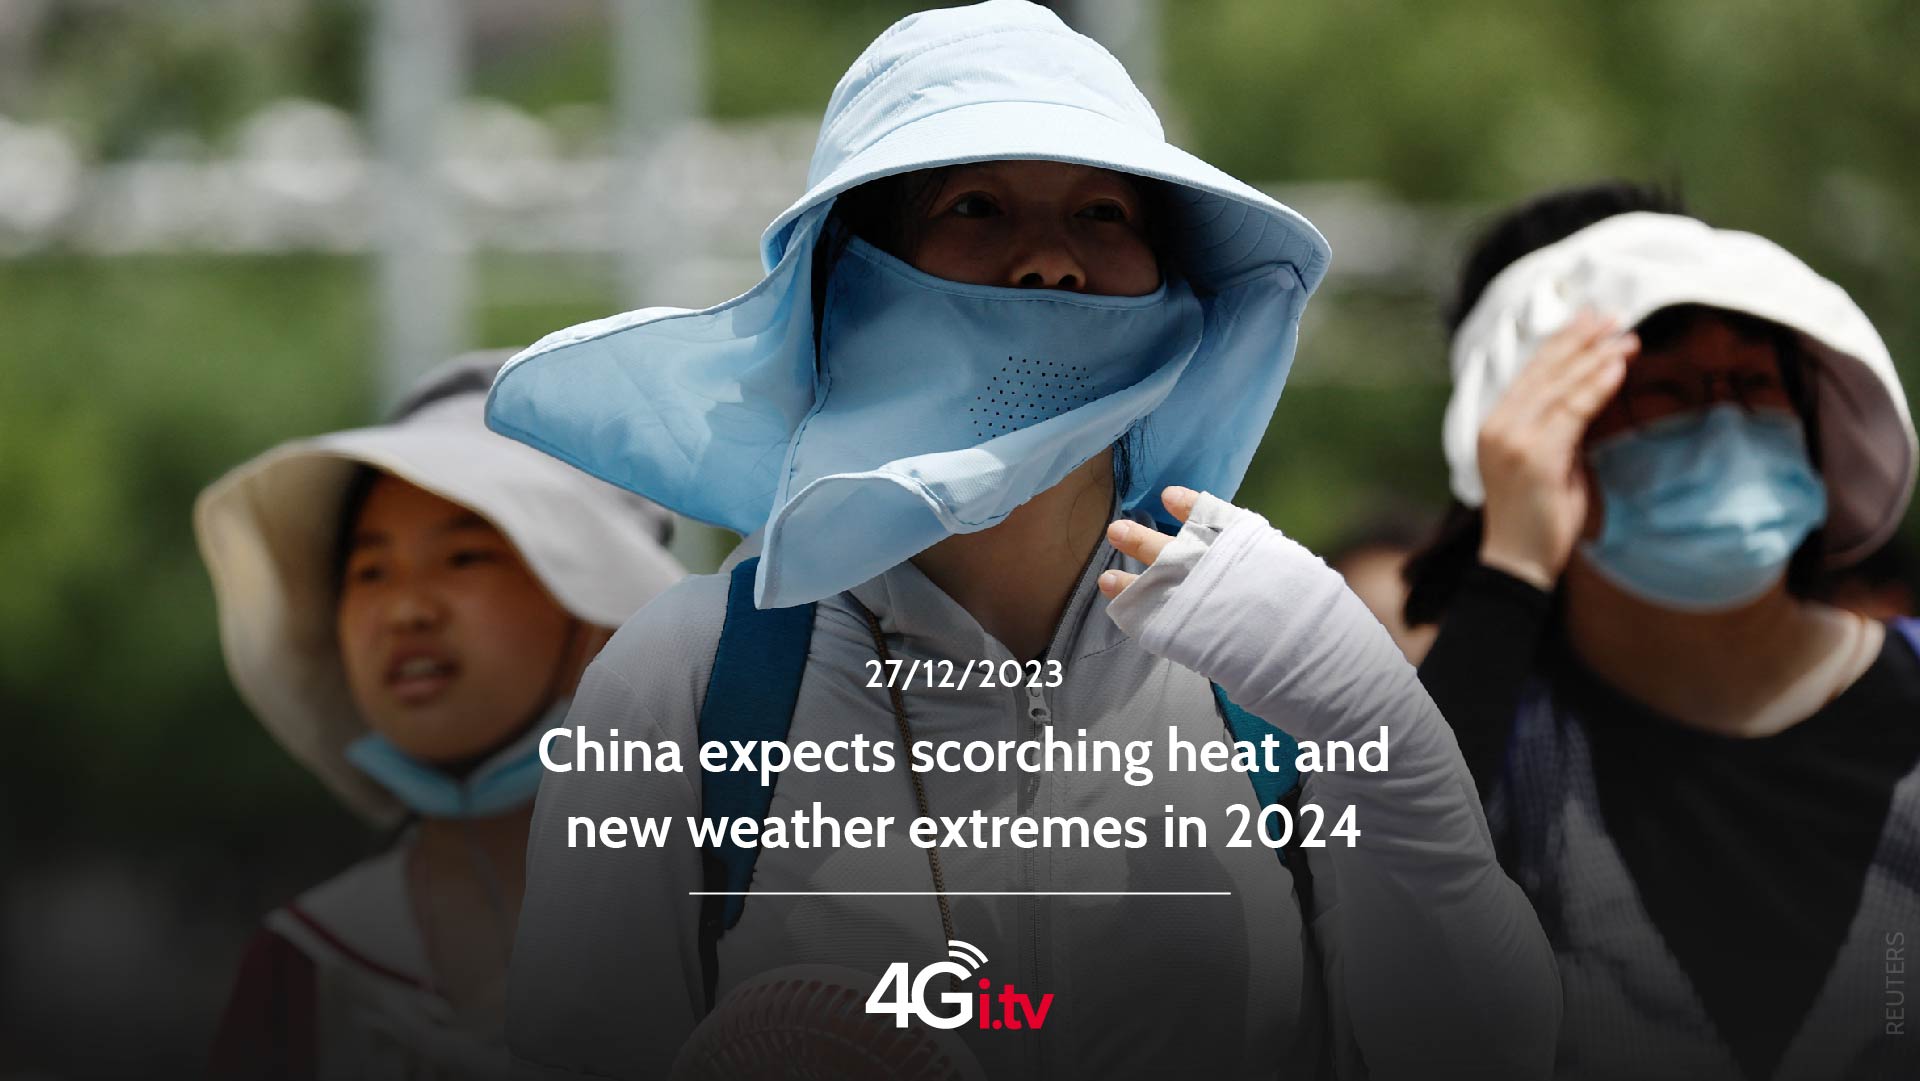 Lesen Sie mehr über den Artikel China expects scorching heat and new weather extremes in 2024